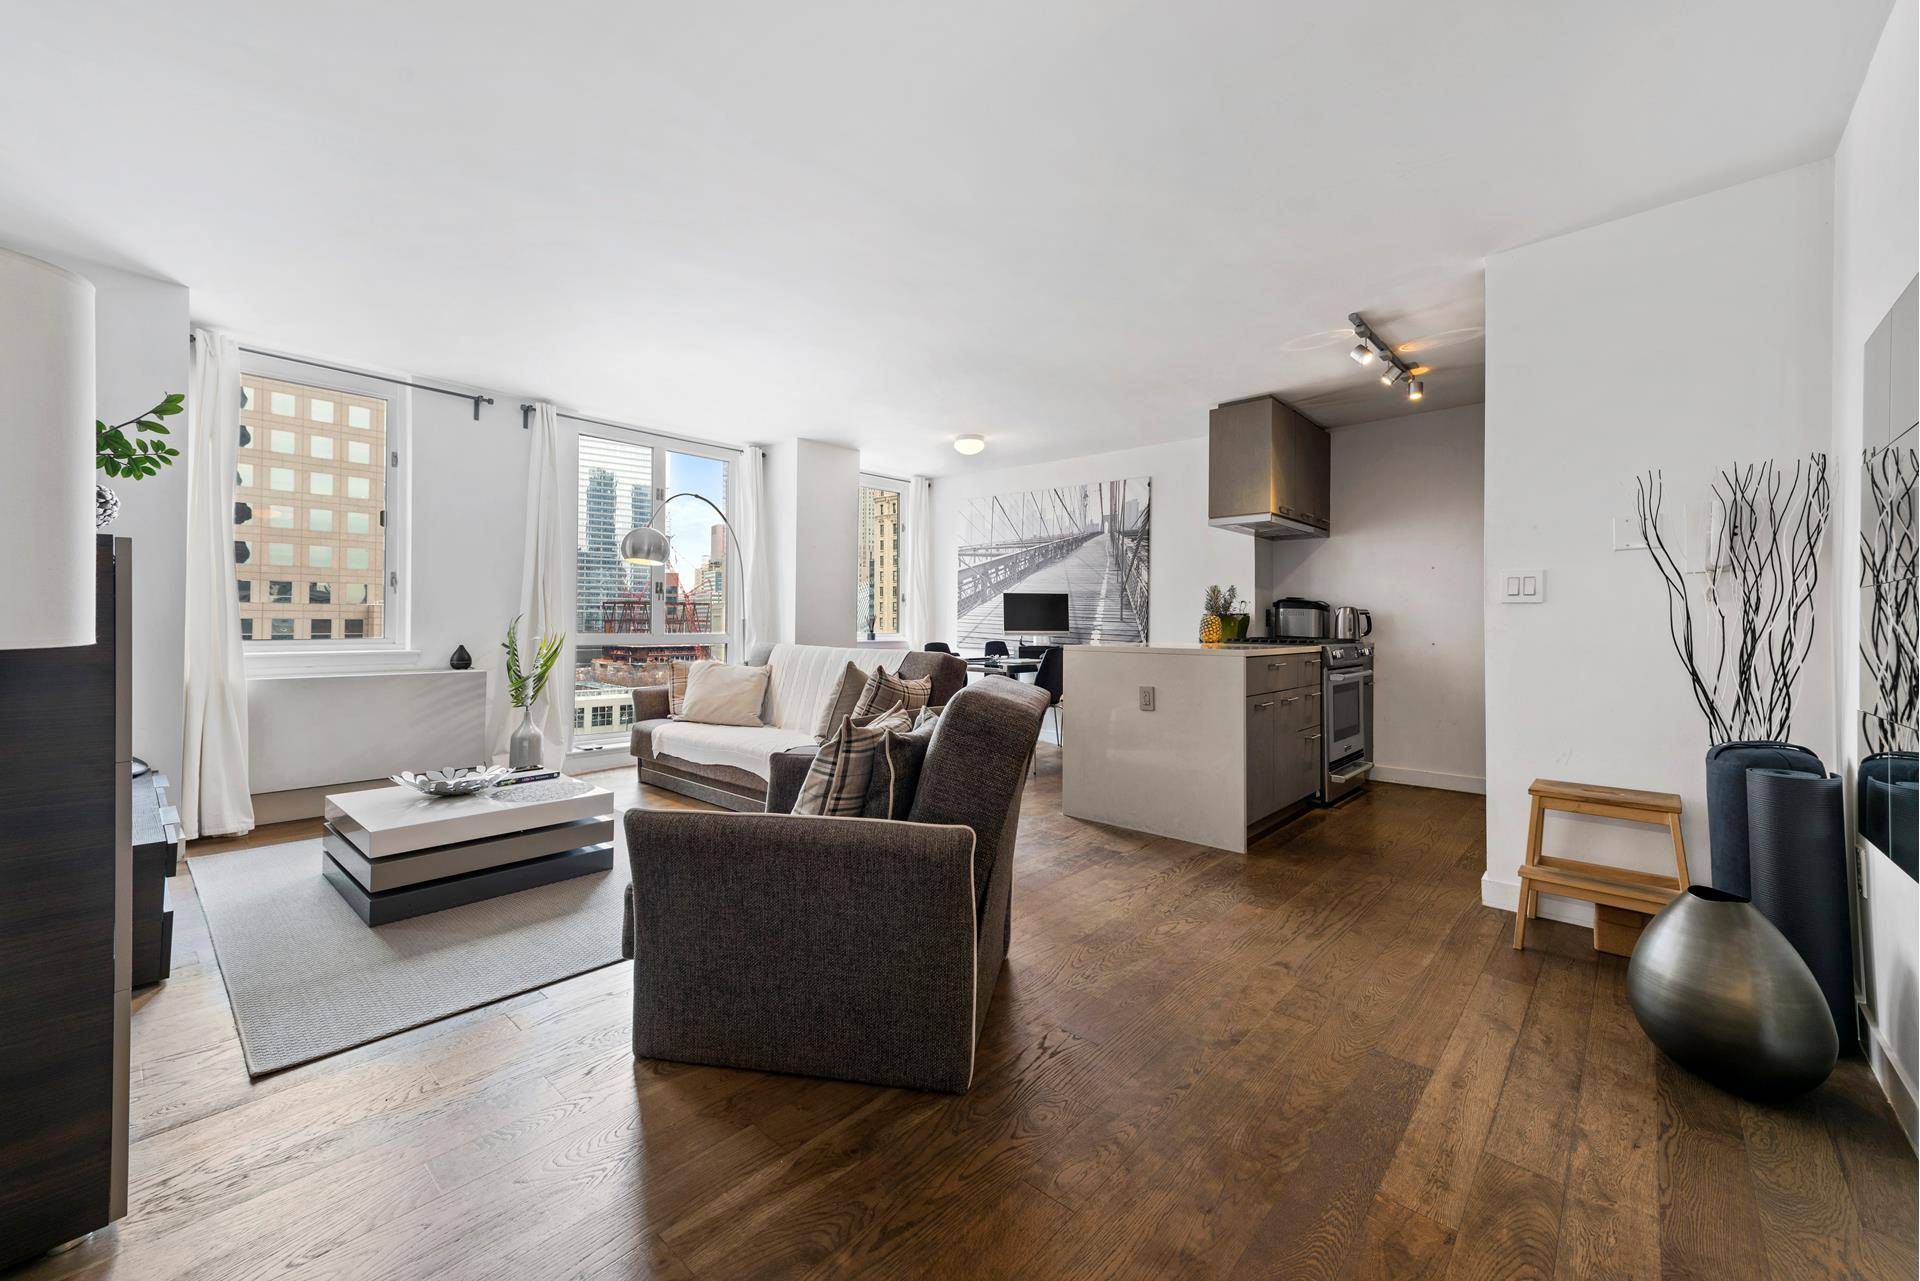 Luxury Living in this truly Oversized 1BR, with one of the most desirable layouts within the building.